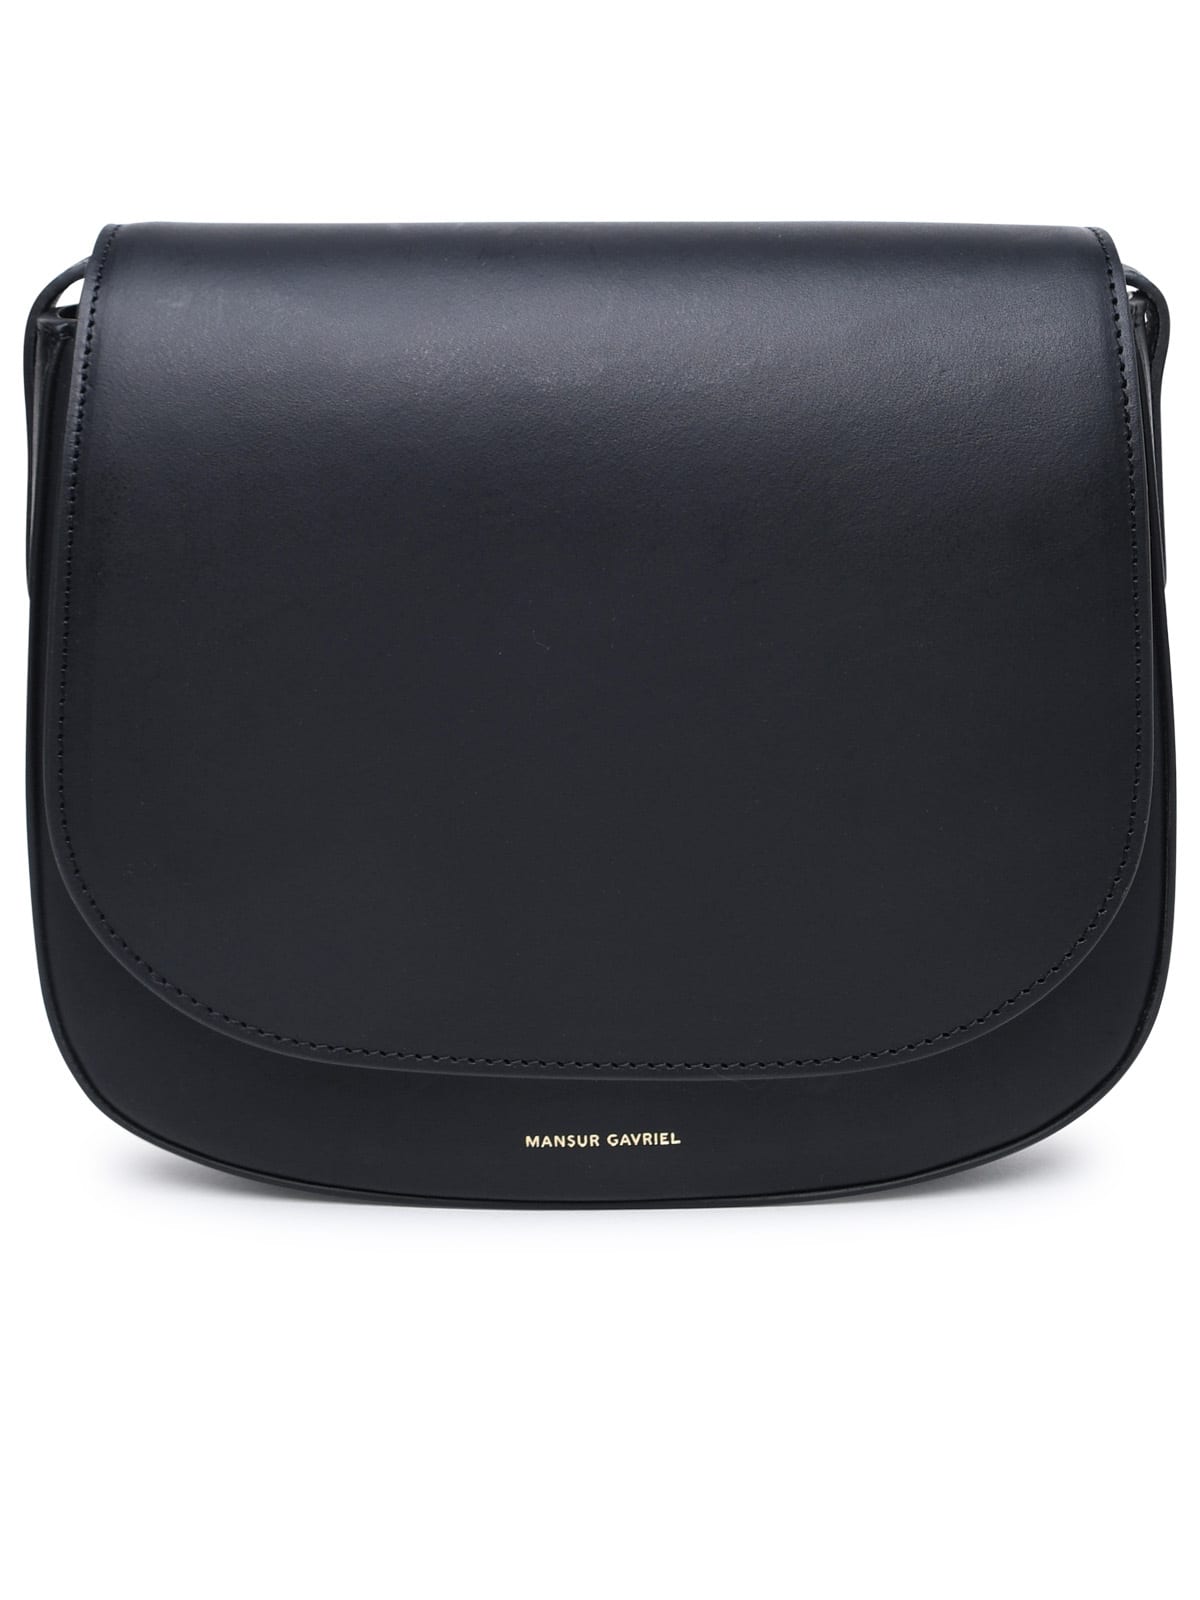 classic Mini Bag In Black Vegetable Tanned Leather